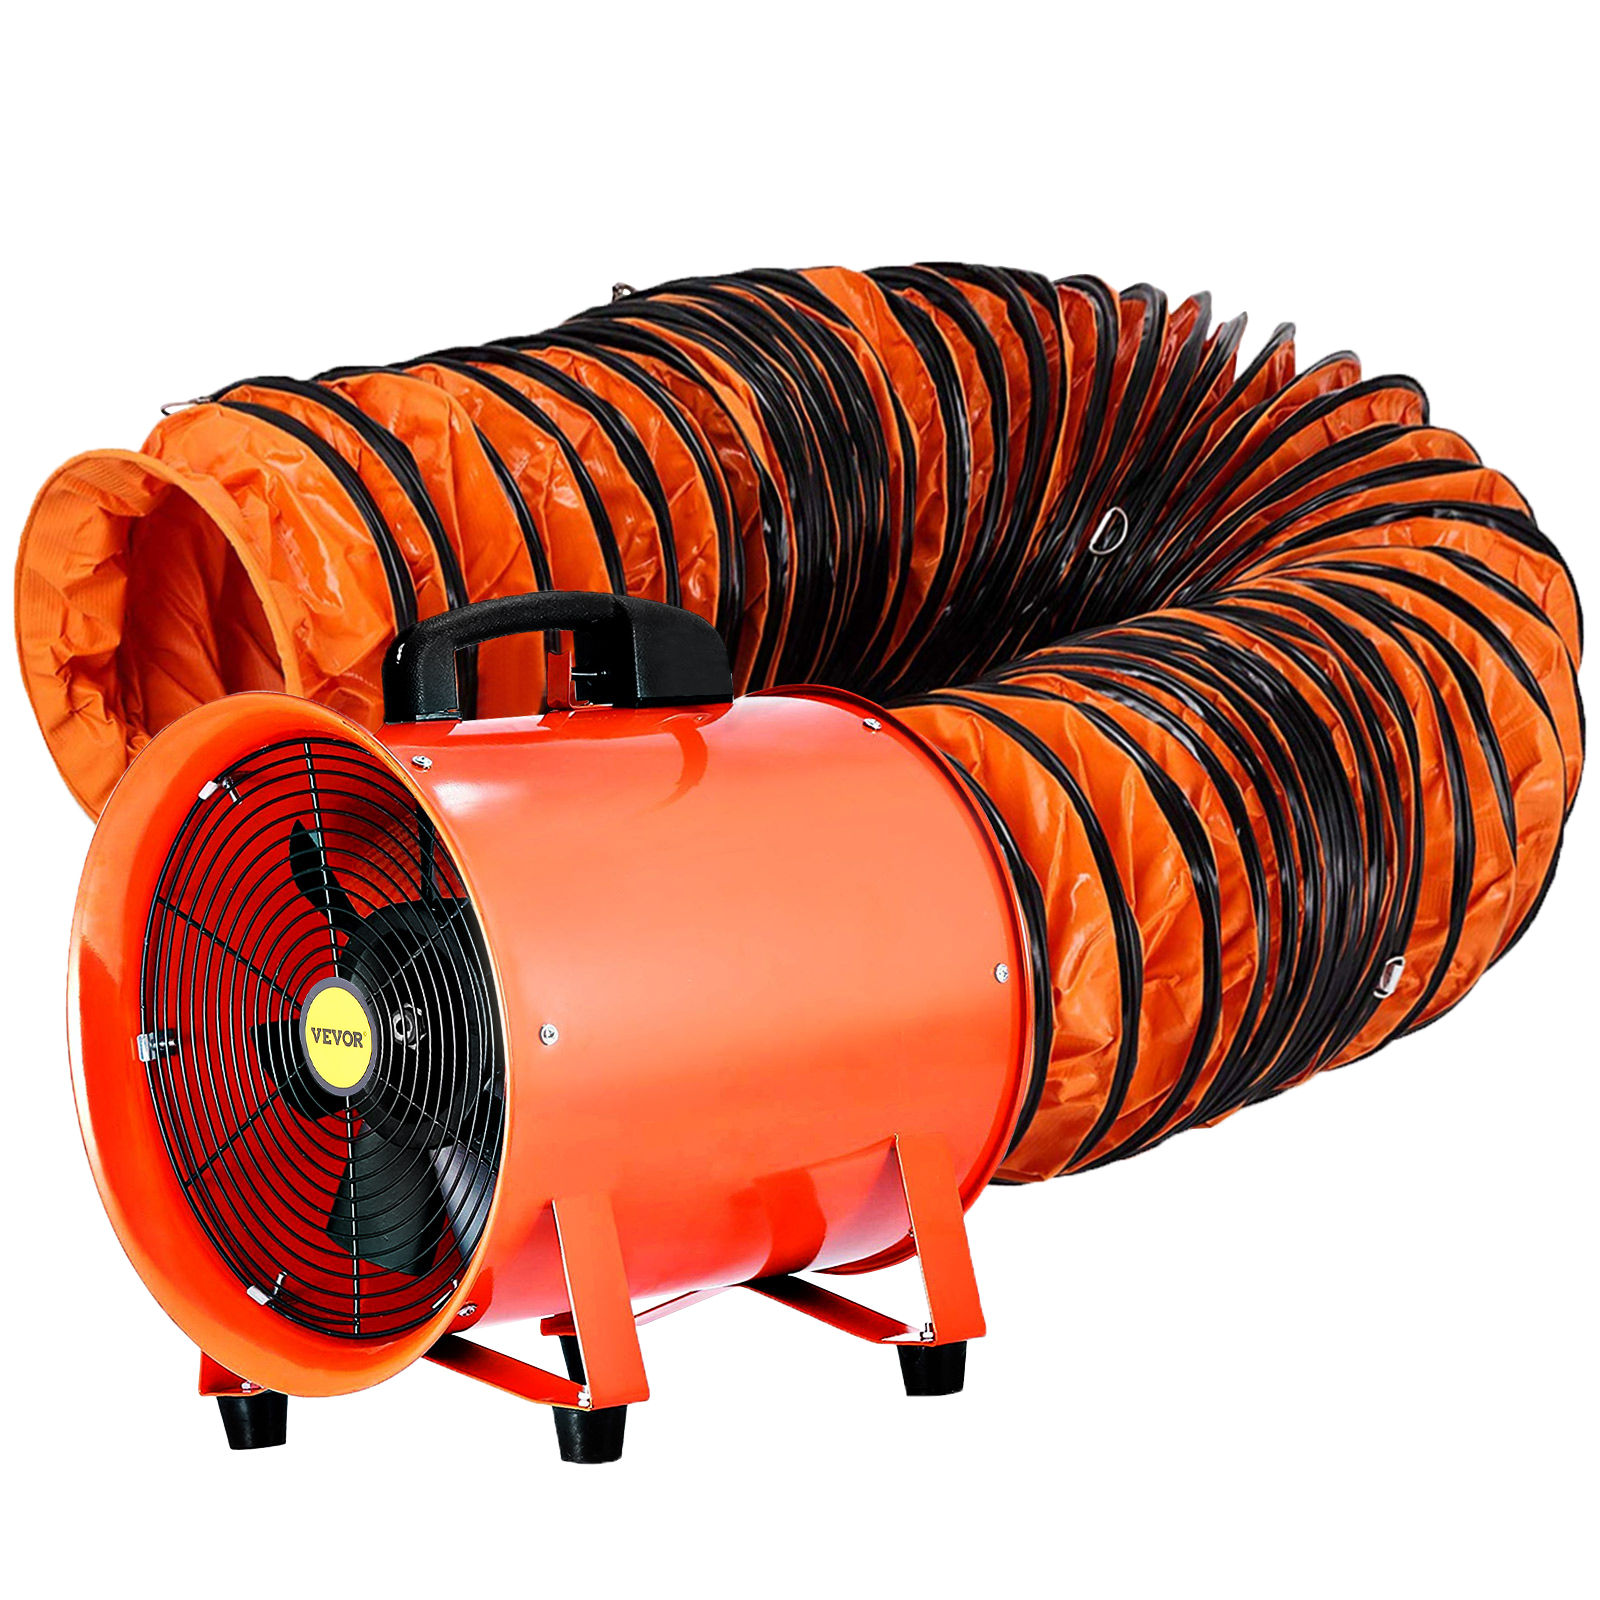 12" Portable Industrial Axial Ventilator Blower Workshop Extractor Fan w/ 500mm Duct Hose от Vevor Many GEOs